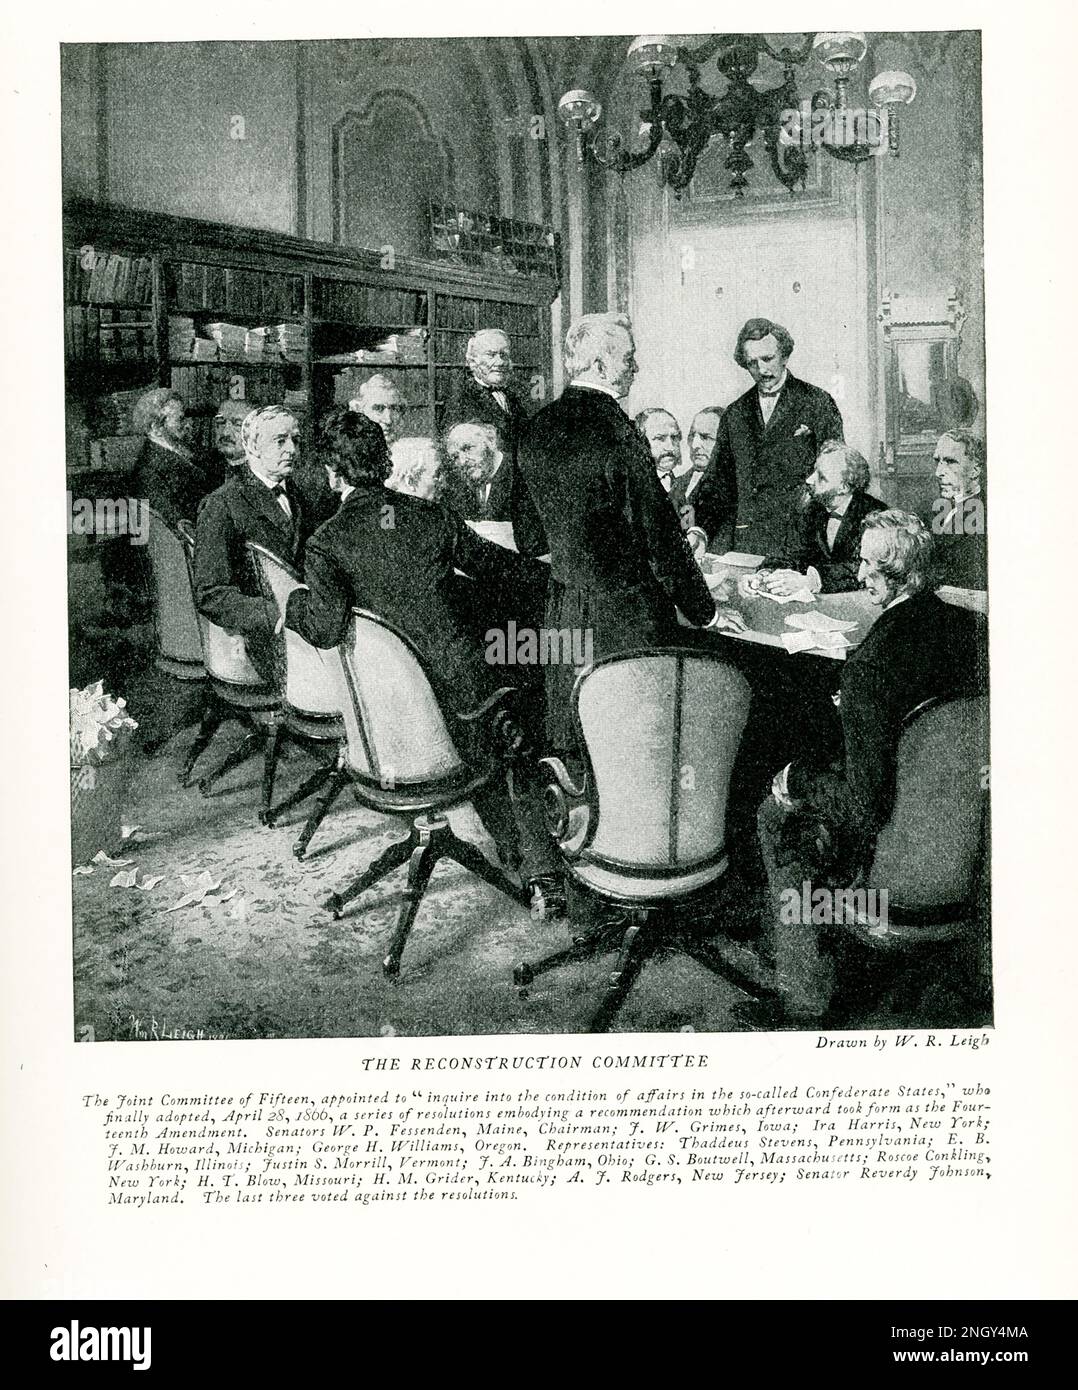 Reconstruction Committee. The Joint Committee of fifteen appointed to ‘inquire into the condition of affairs in the so-called confederate States” who finally adopted, April 28, 1866, a series of resolutions embodying a recommendation which afterward took form as the Fourteenth amendment. Senators W P Fessenden, Maine, Chairman; F W Grimes, Iowa; Ira Harris, New York; F M Howard, Michigan; George H Williams, Oregon. Representatives: Thaddeus Stevens, Pennsylvania; E B Washburn, Illinois; Justin S Morrill, Vermont; J A Bingham, Ohio; G S Boutwell, Massachusetts; Roscoe Conkling, New York; H T Bl Stock Photo